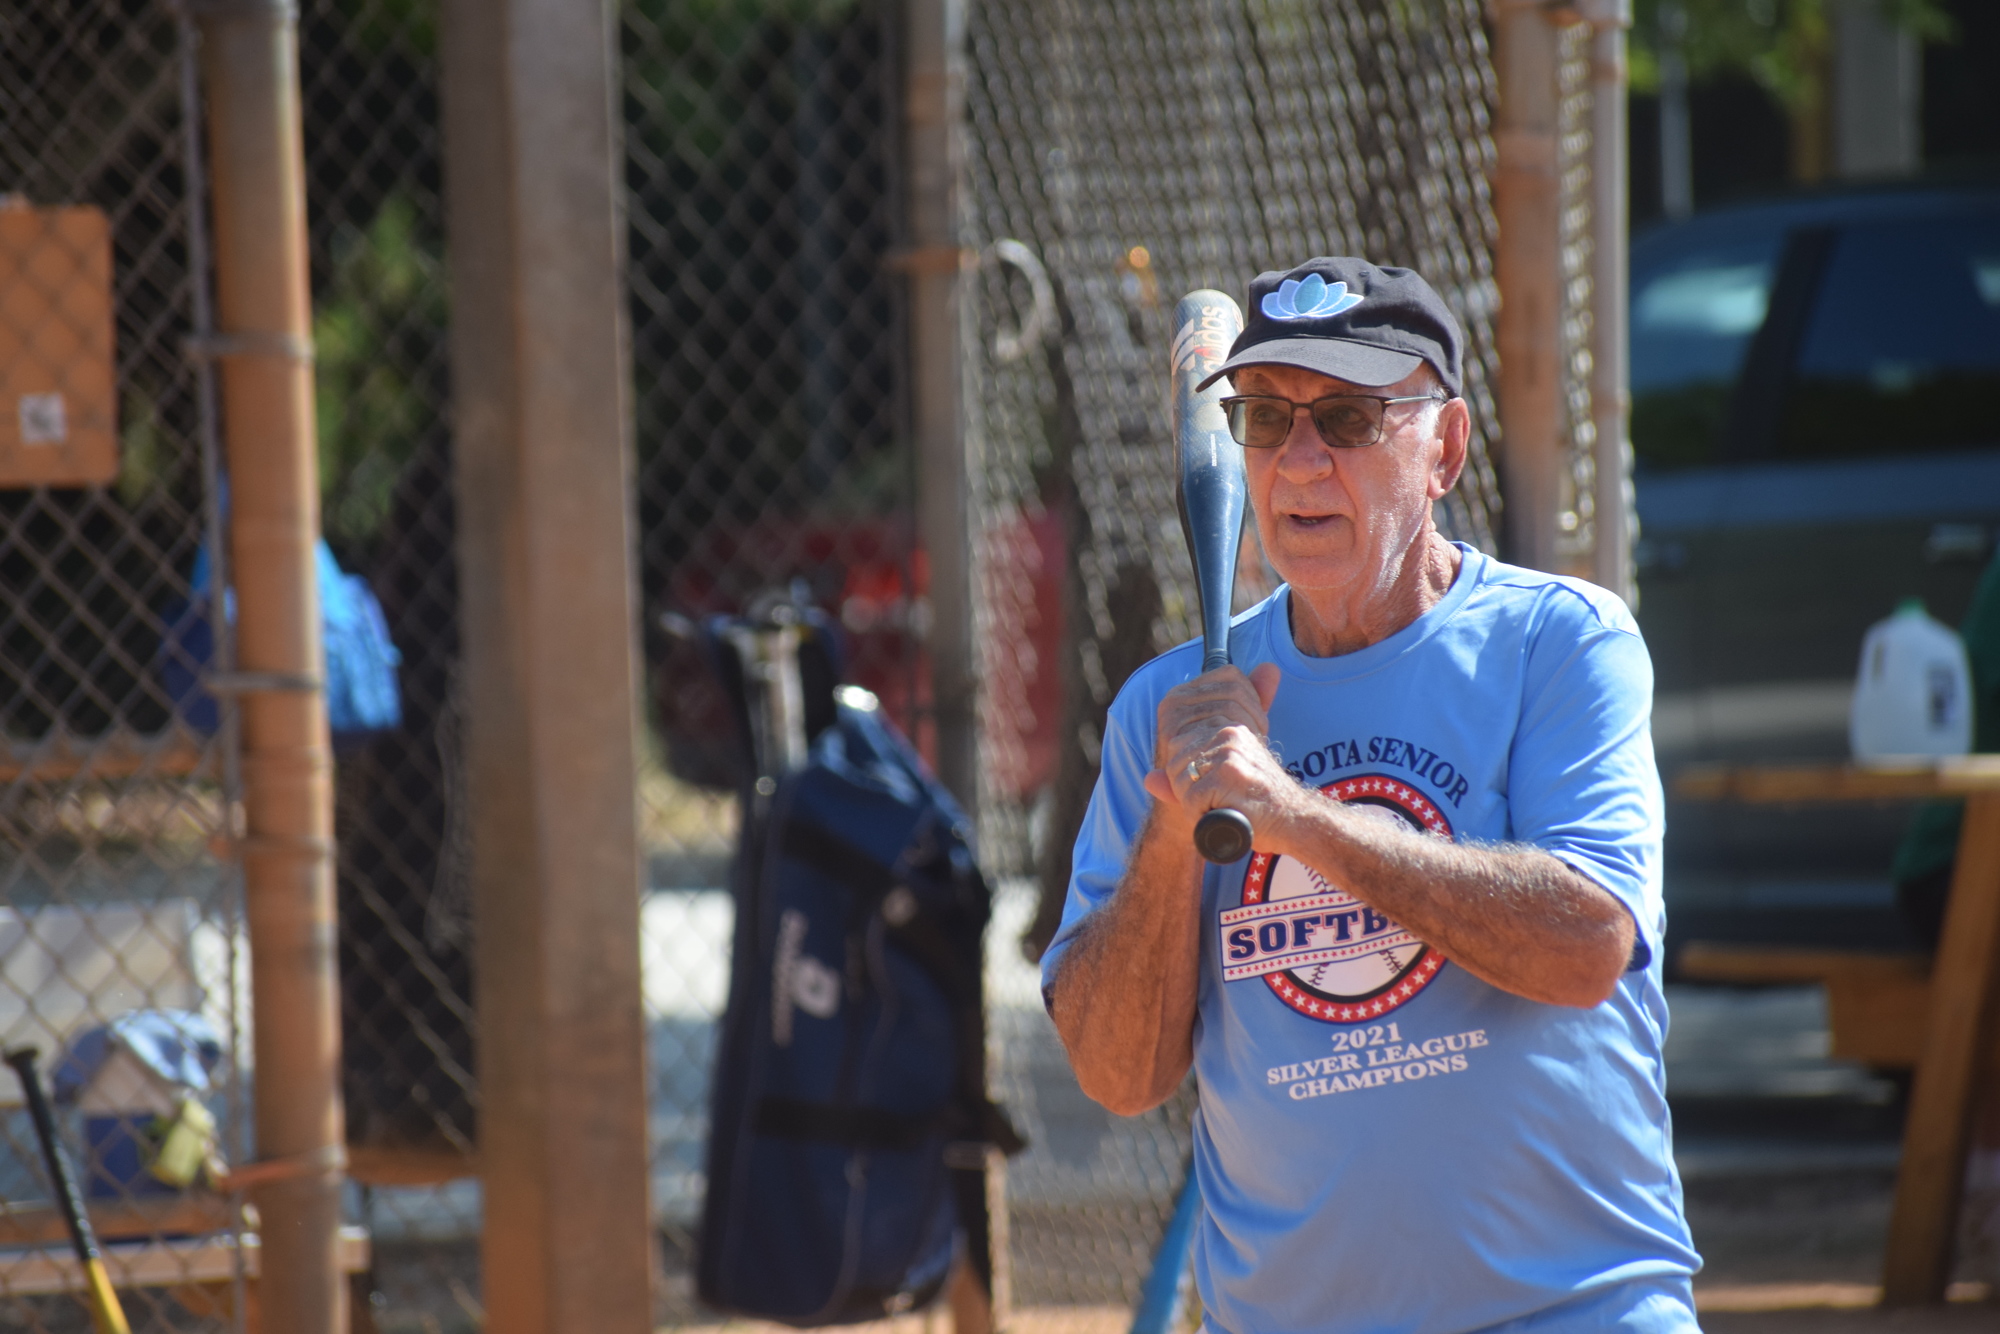 Sarasota's Jack Zimmerman said even at 77, he is trying to learn new skills on the diamond.